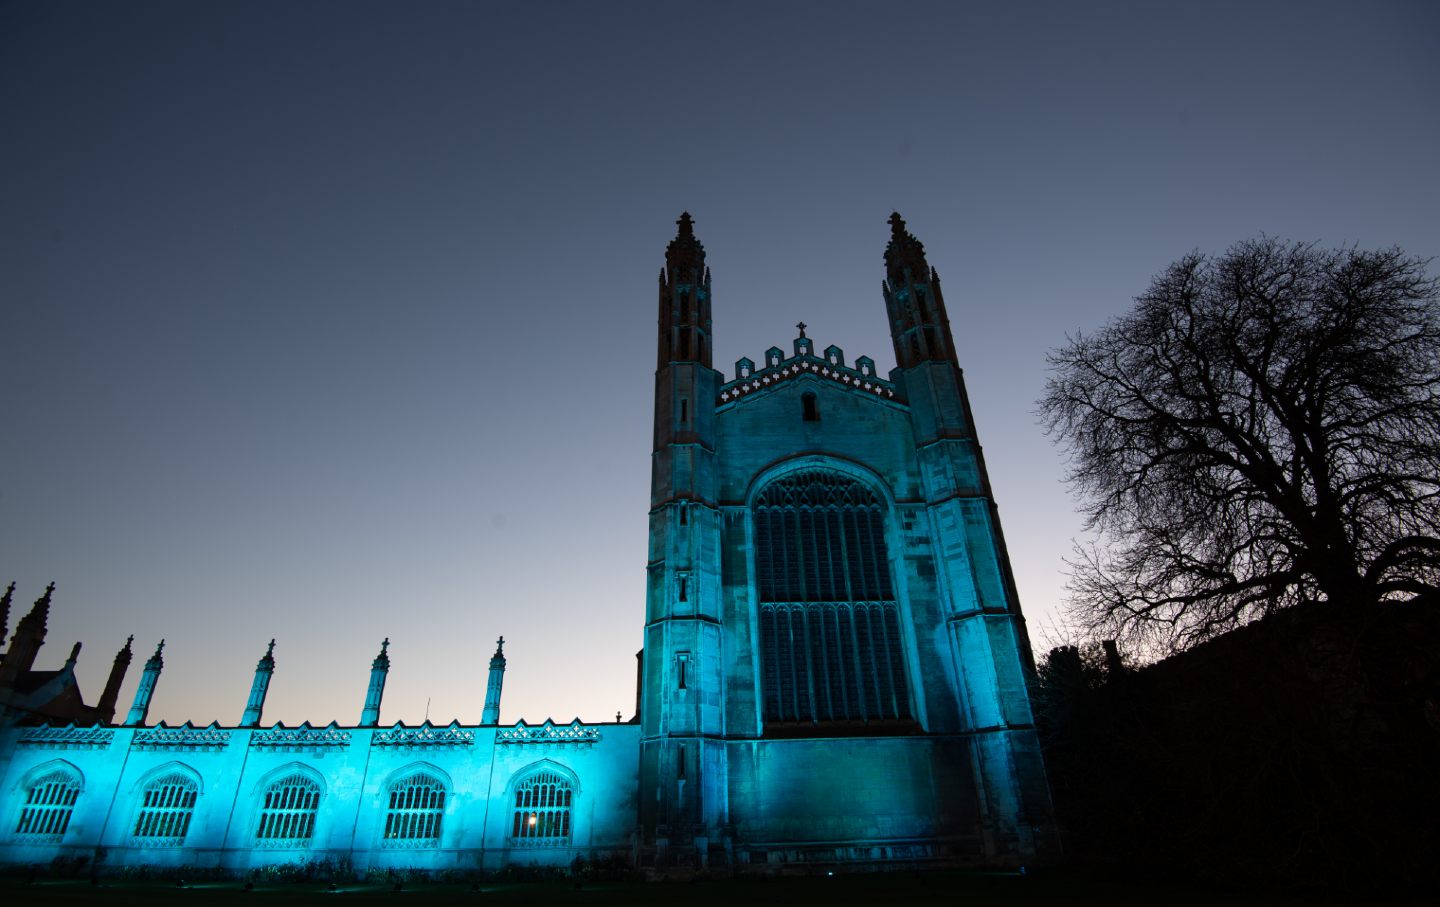 King‘s College at Cambridge University in the UK is bathed in blue light to celebrate NHS workers.